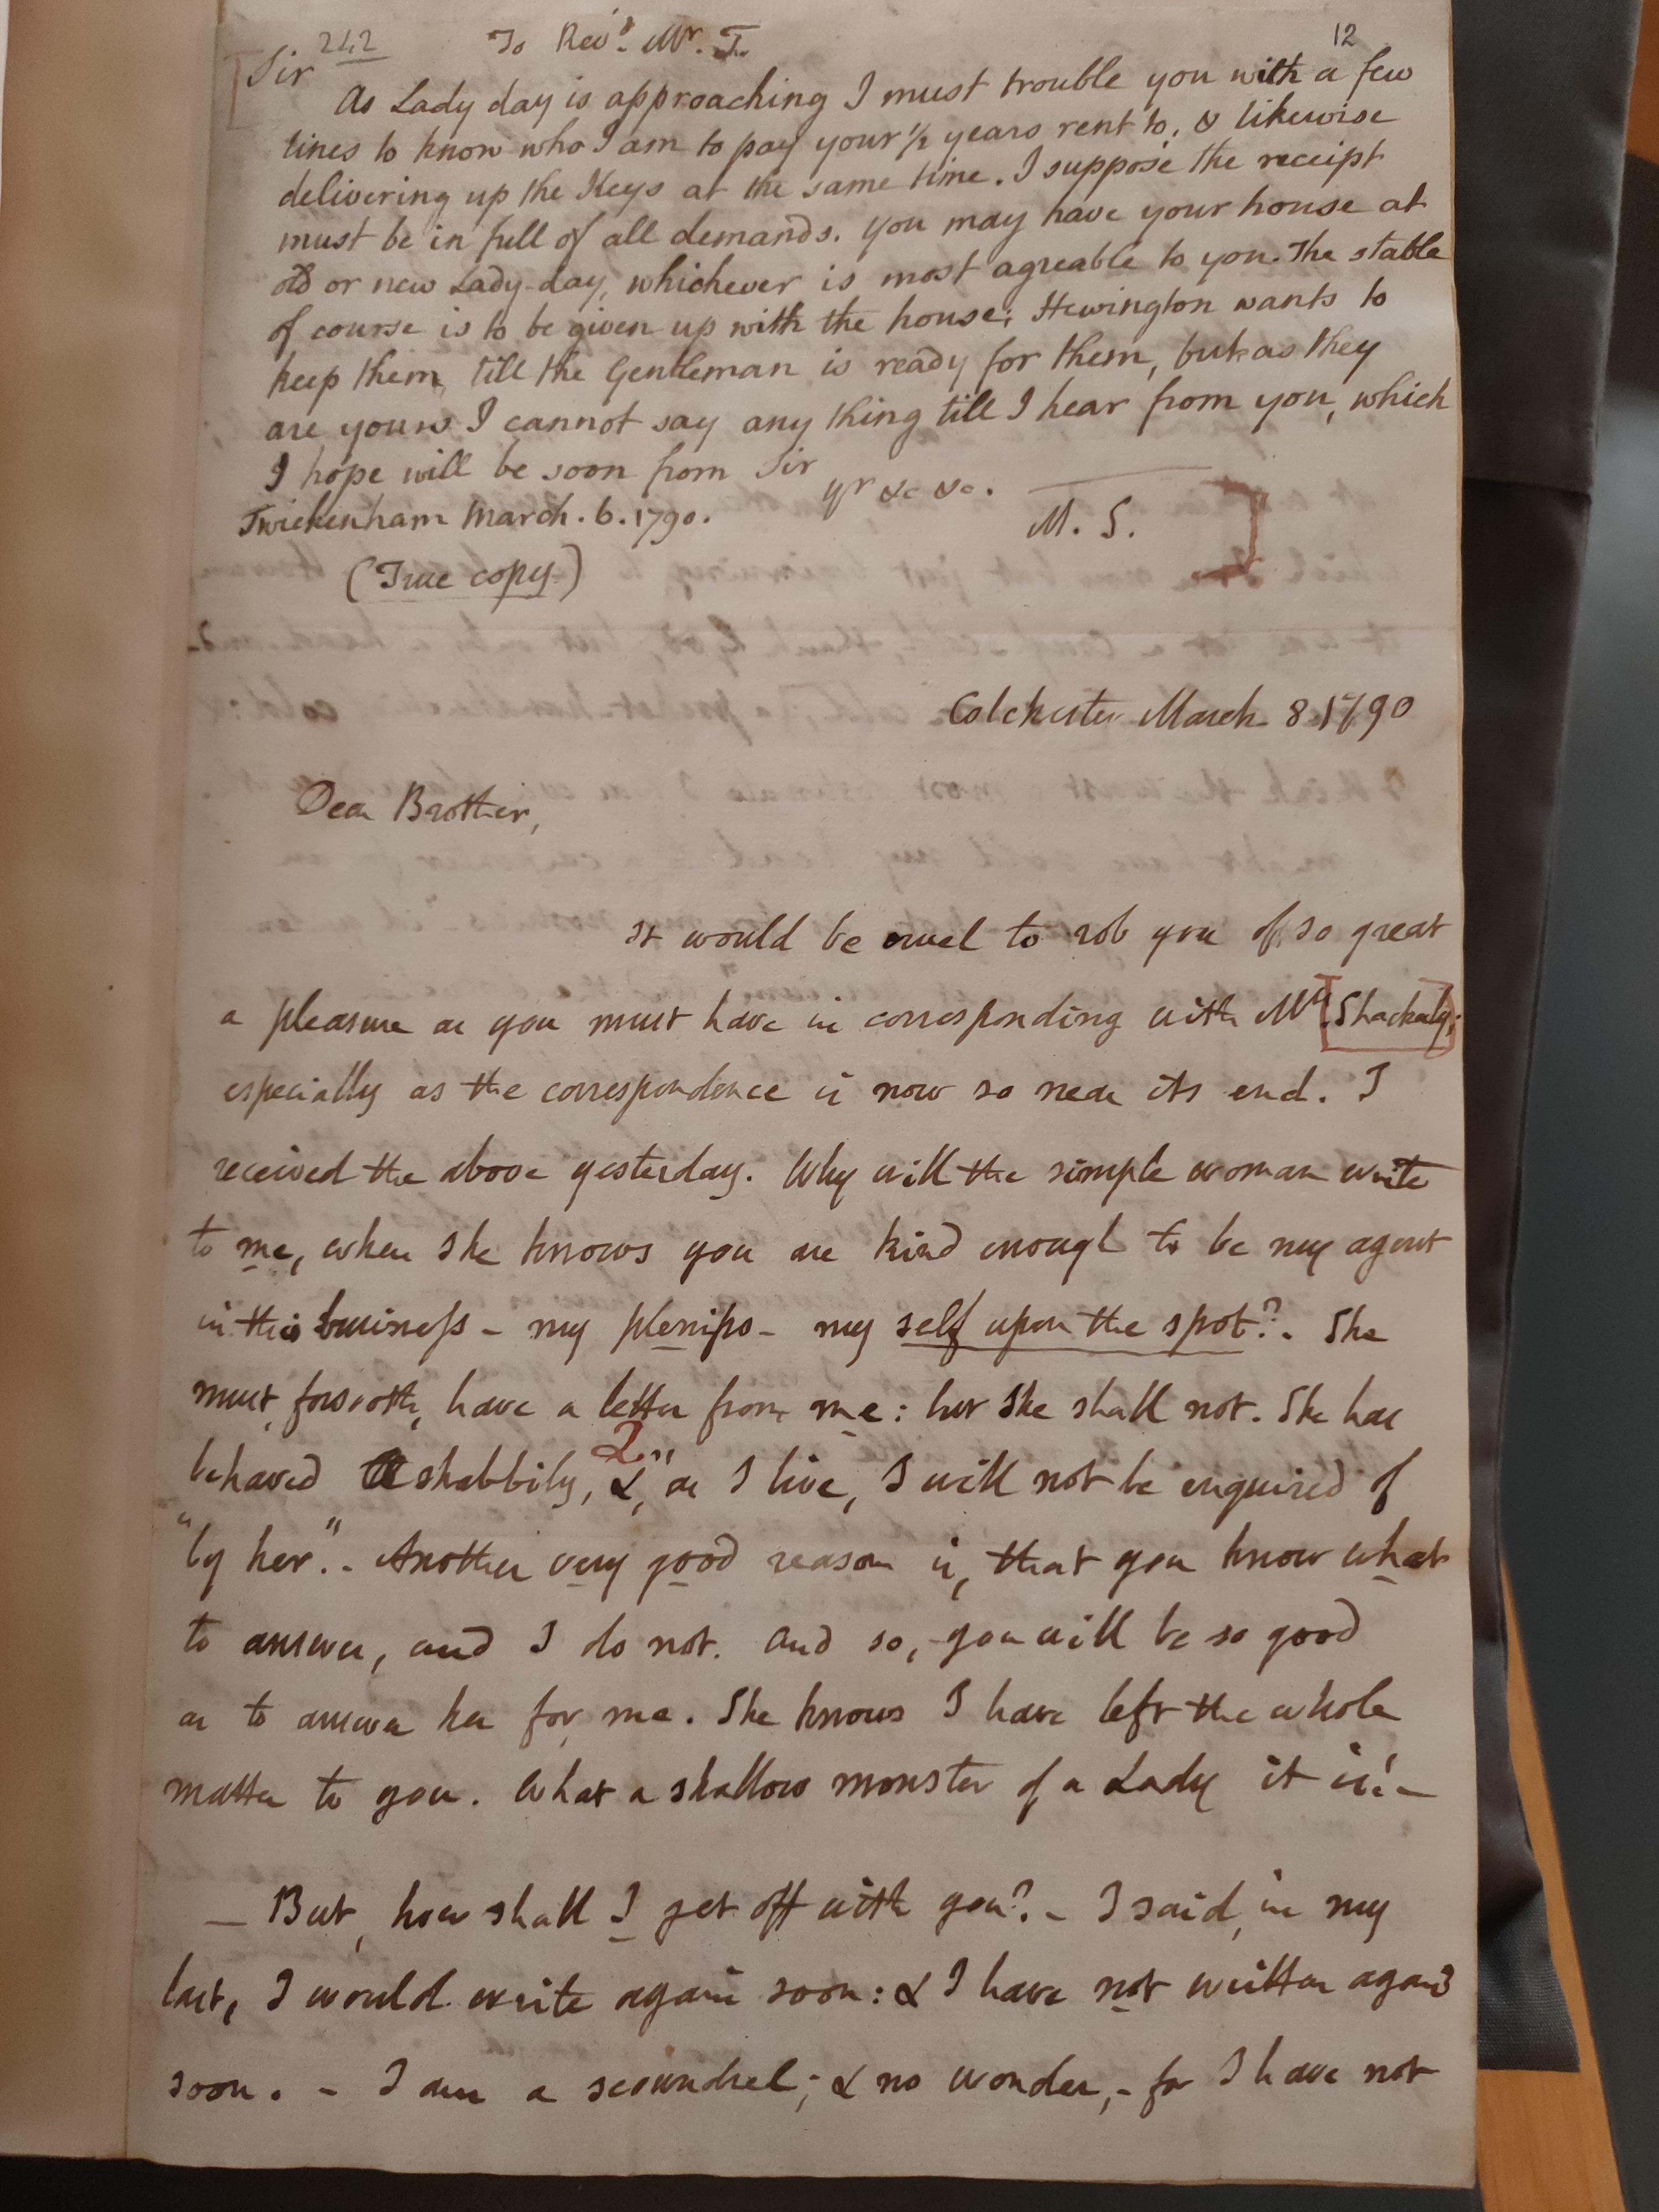 Image #1 of letter: Thomas Twining to Daniel Twining, 8 March 1790